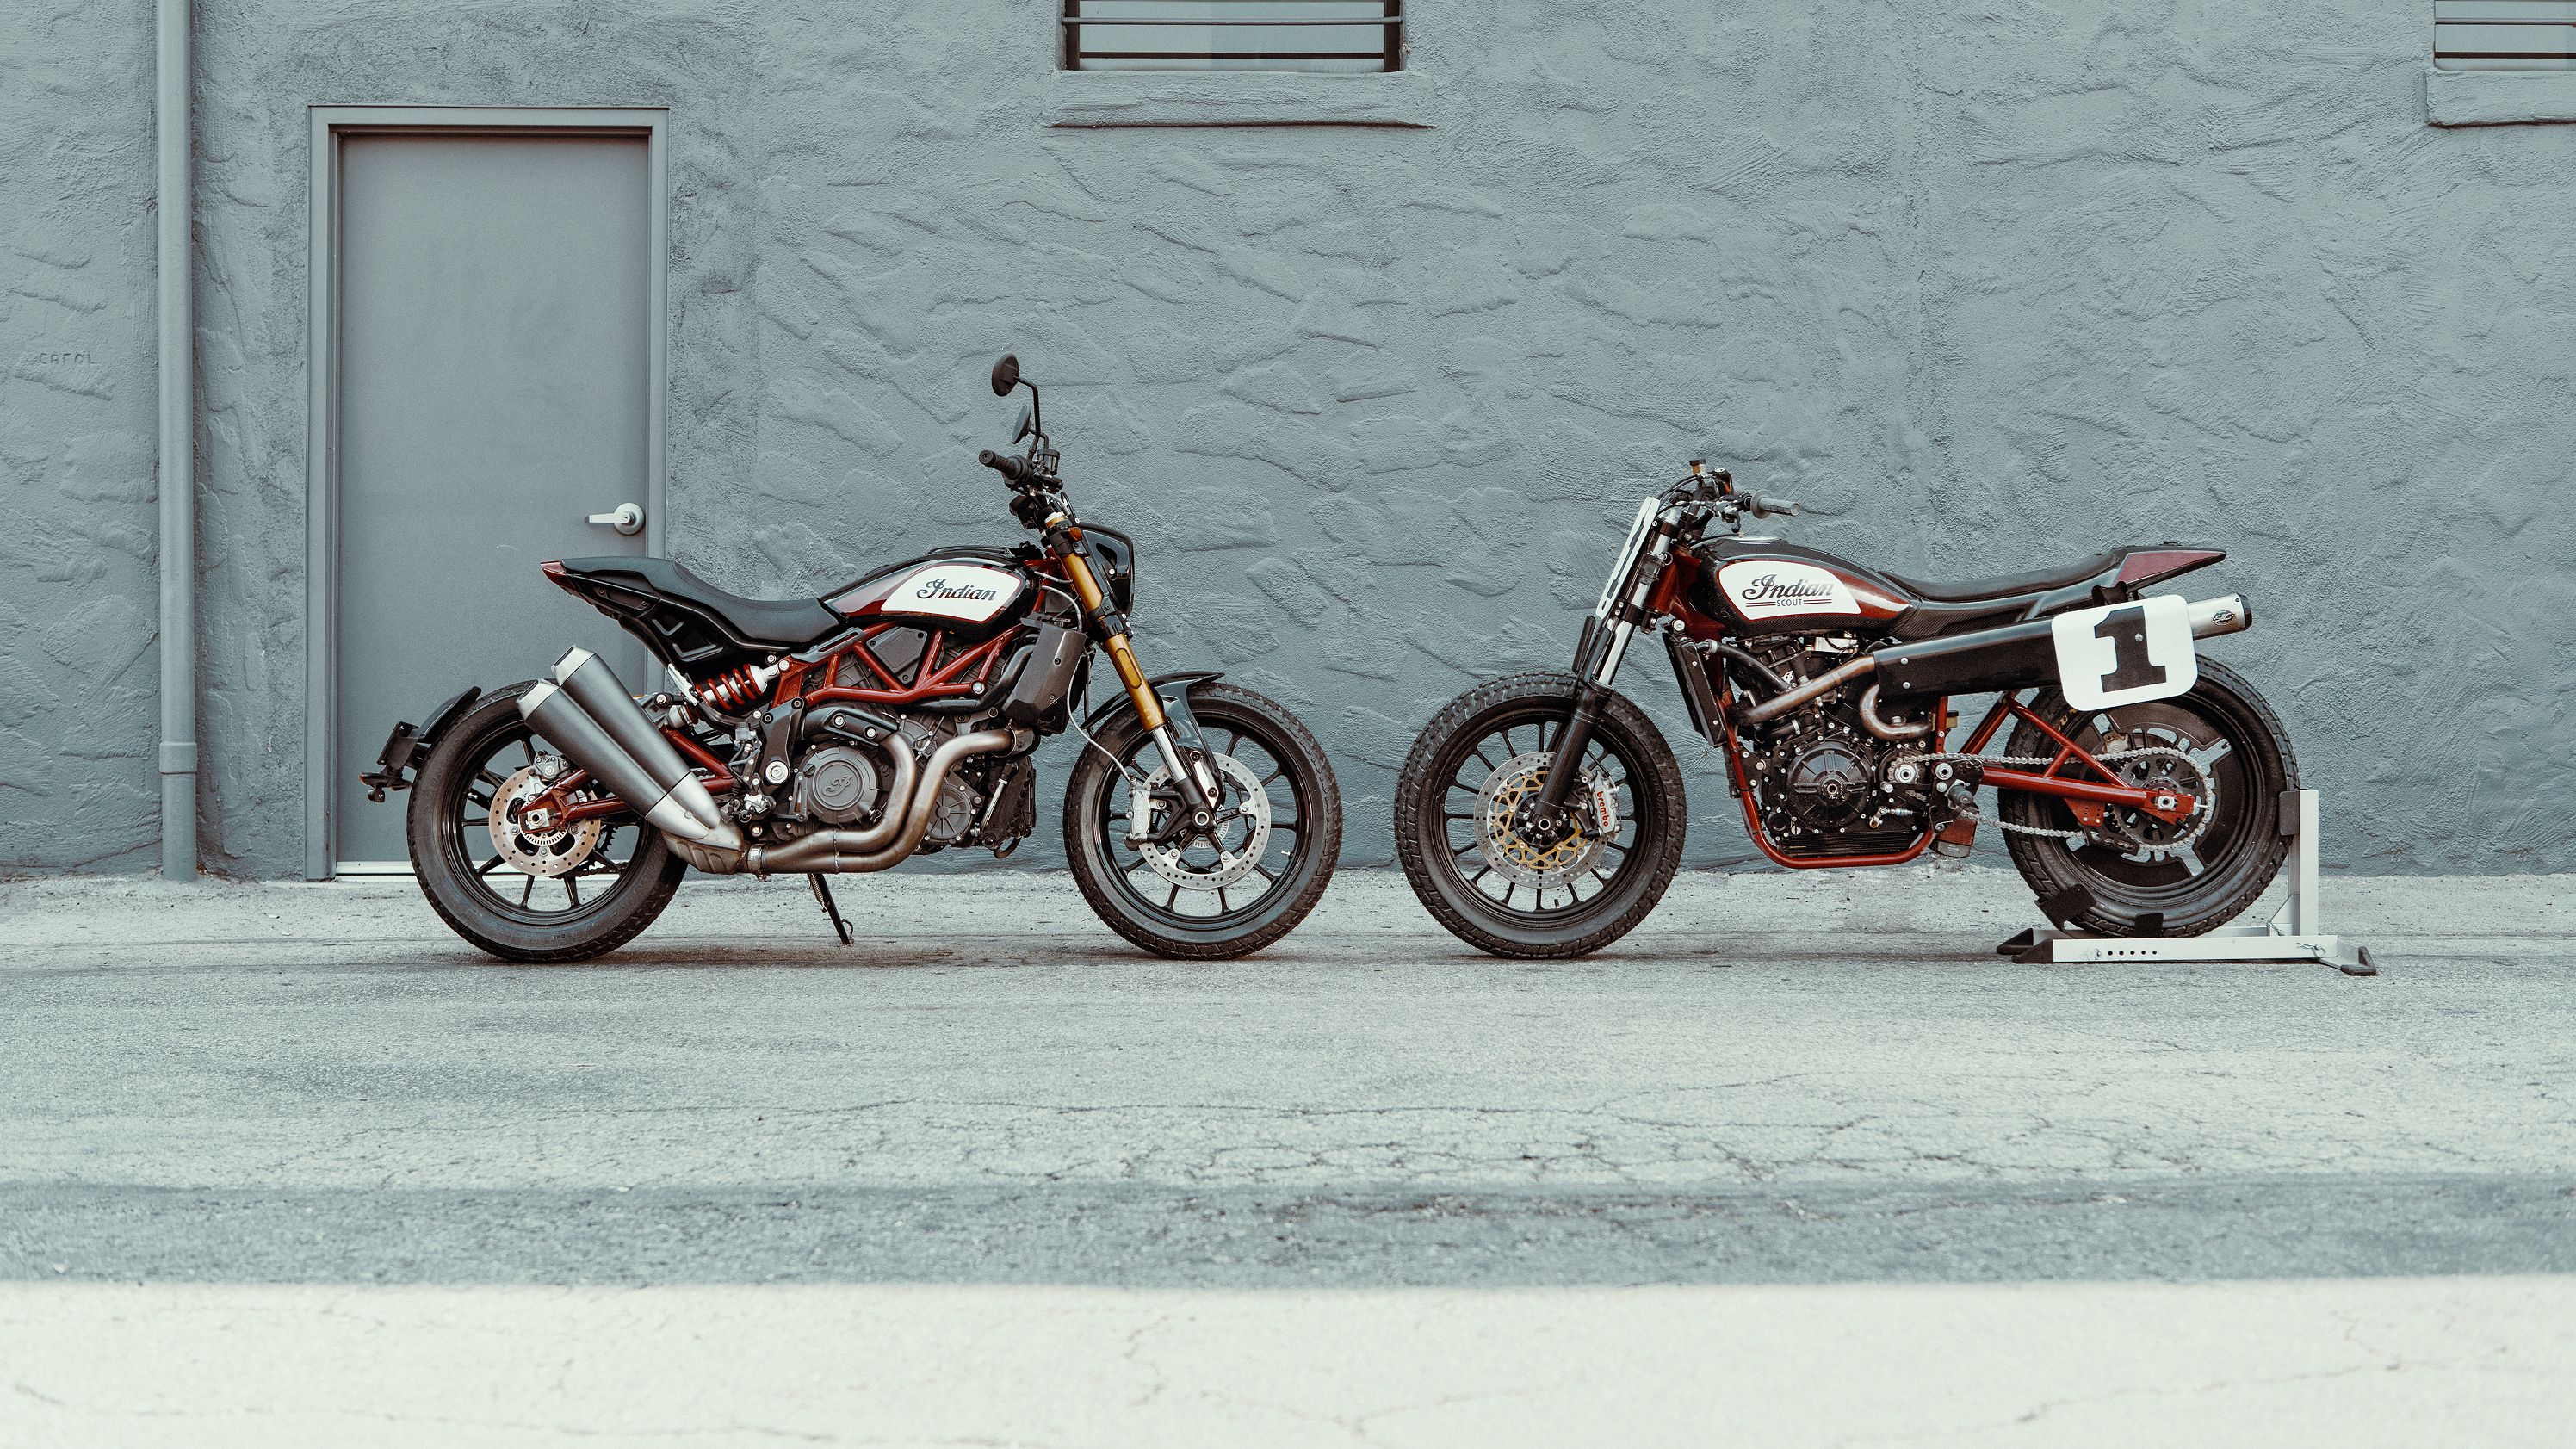 2019 - 2020 Indian Motorcycle FTR 1200 S